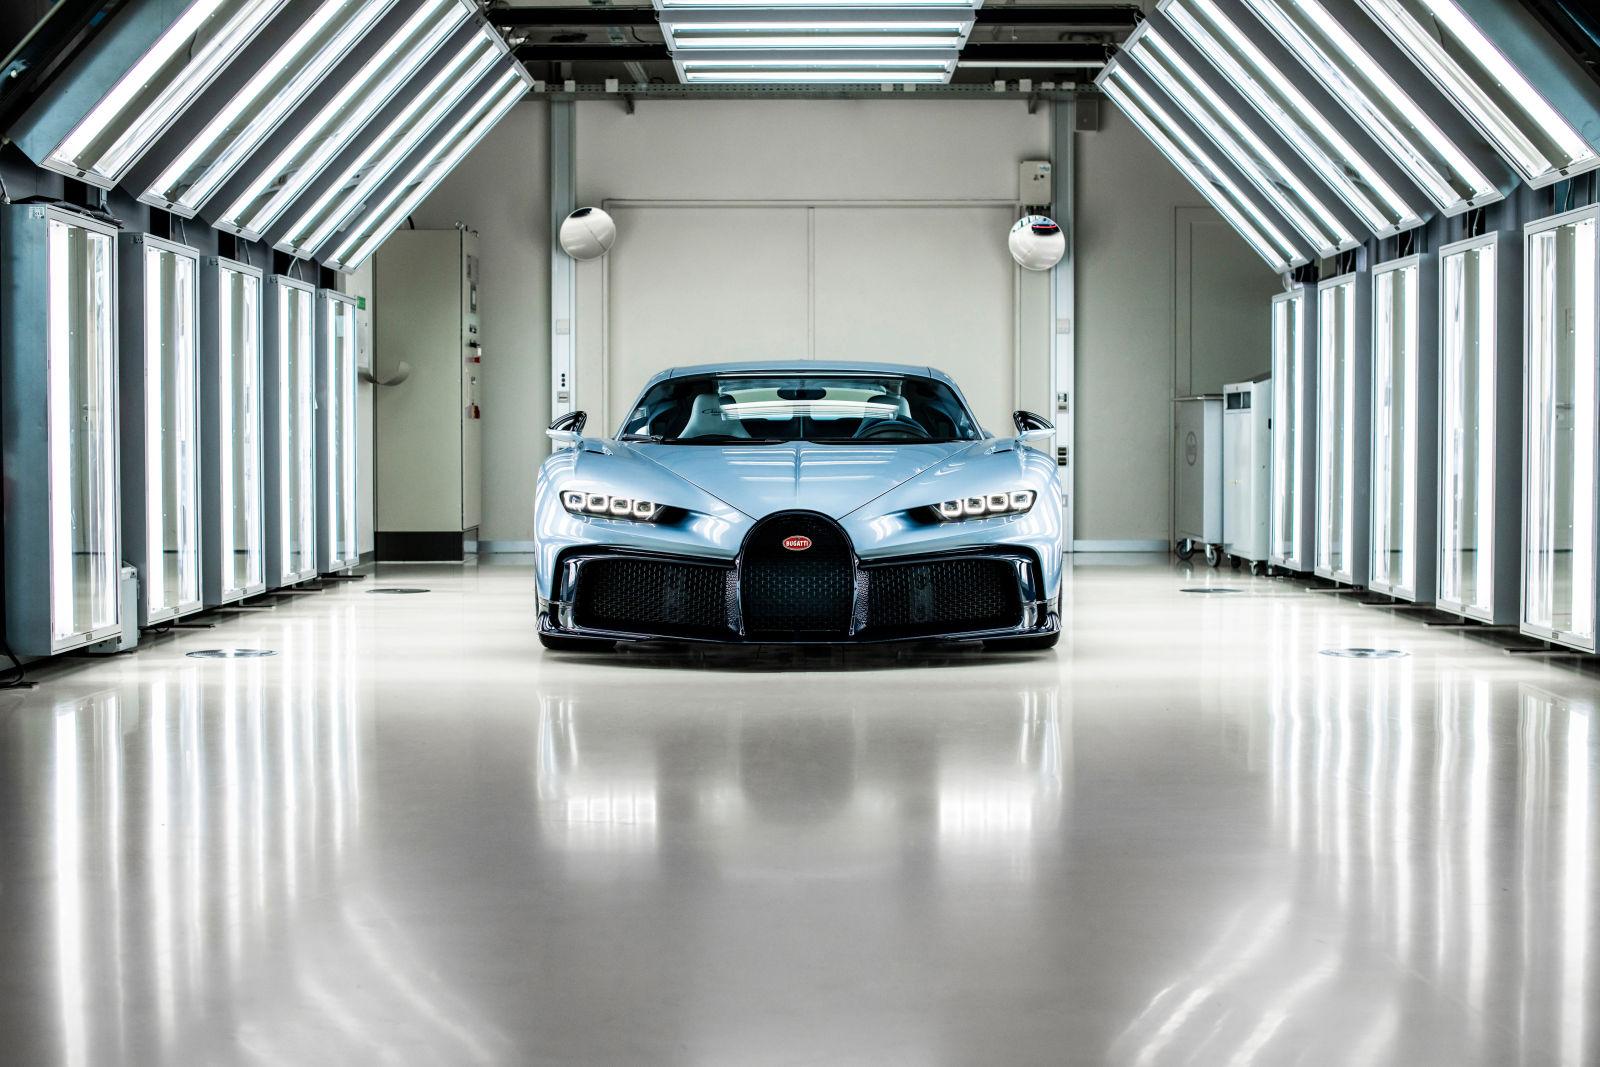 full specifications and price of the Bugatti Chiron Profilée in Nigeria